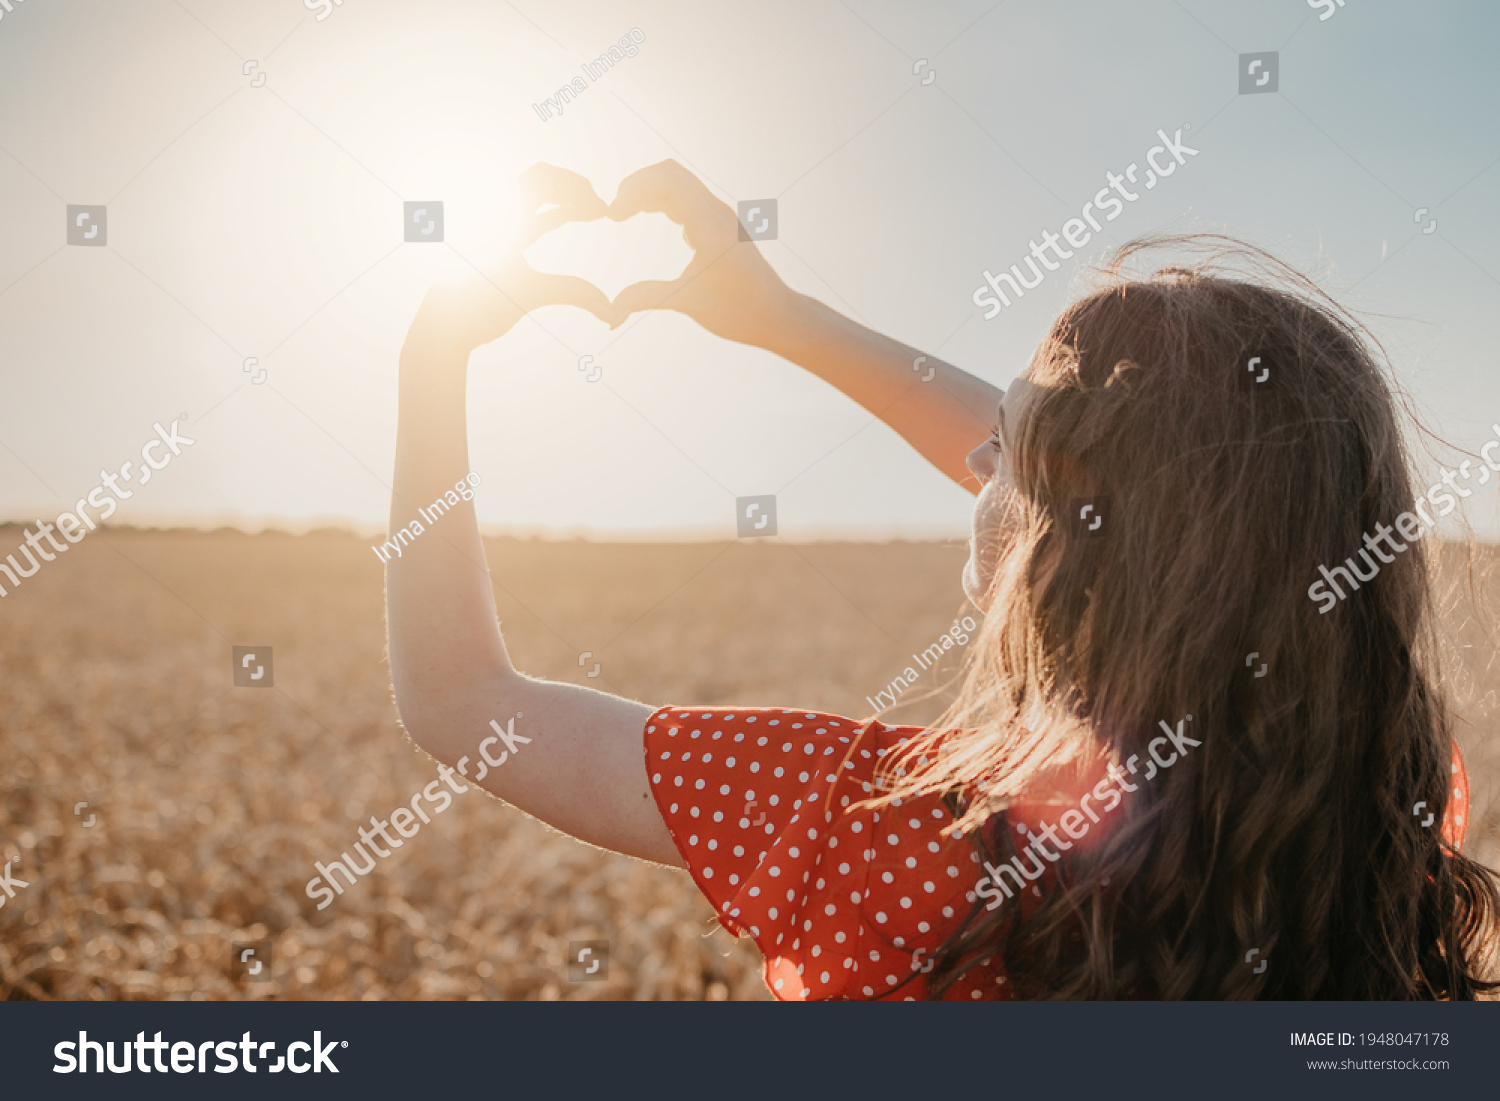 Vitamin D in Womens Health, Role of Vitamin D3 Supplements in female health. Young woman enjoying sun in nature background #1948047178